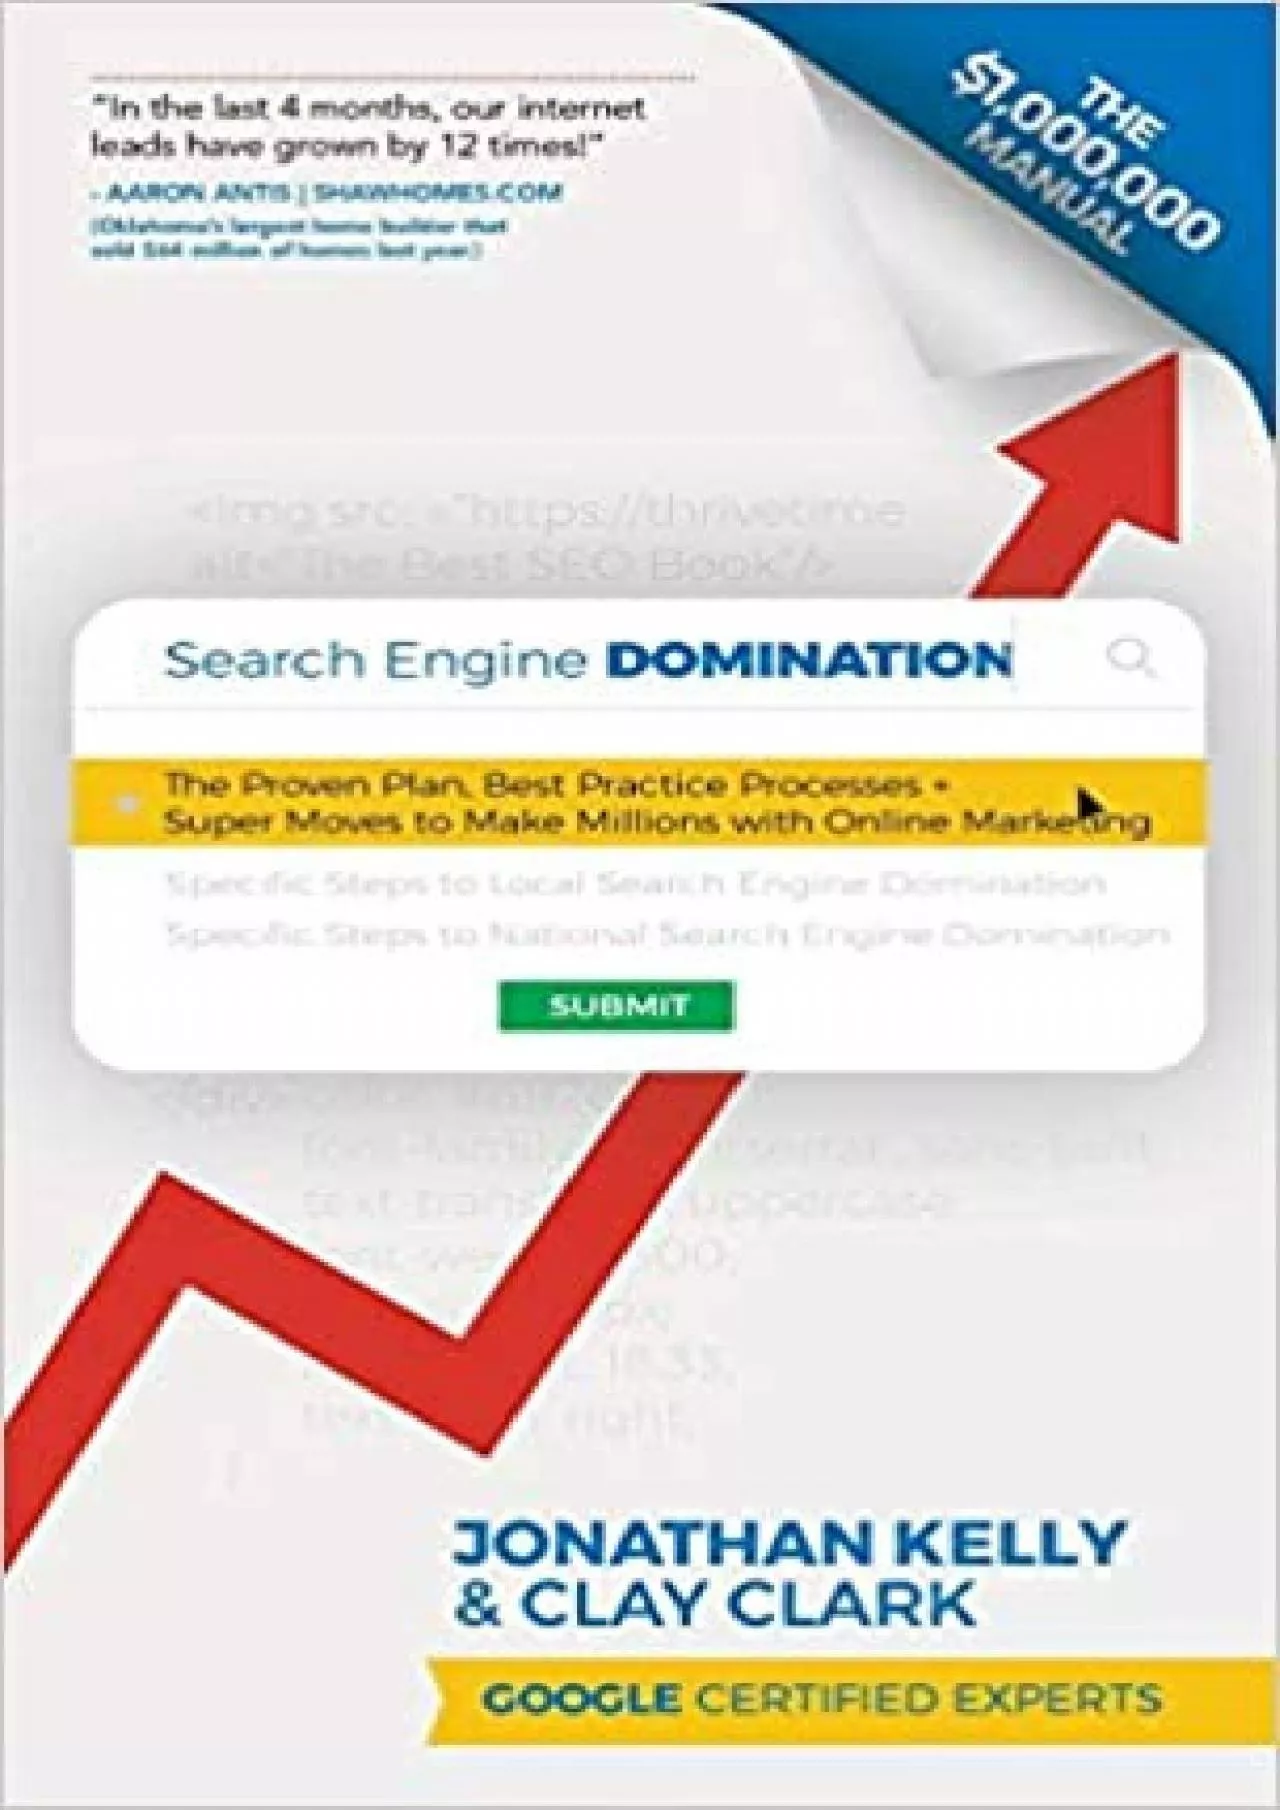 Search Engine Domination The Proven Plan, Best Practice Processes + Super Moves to Make